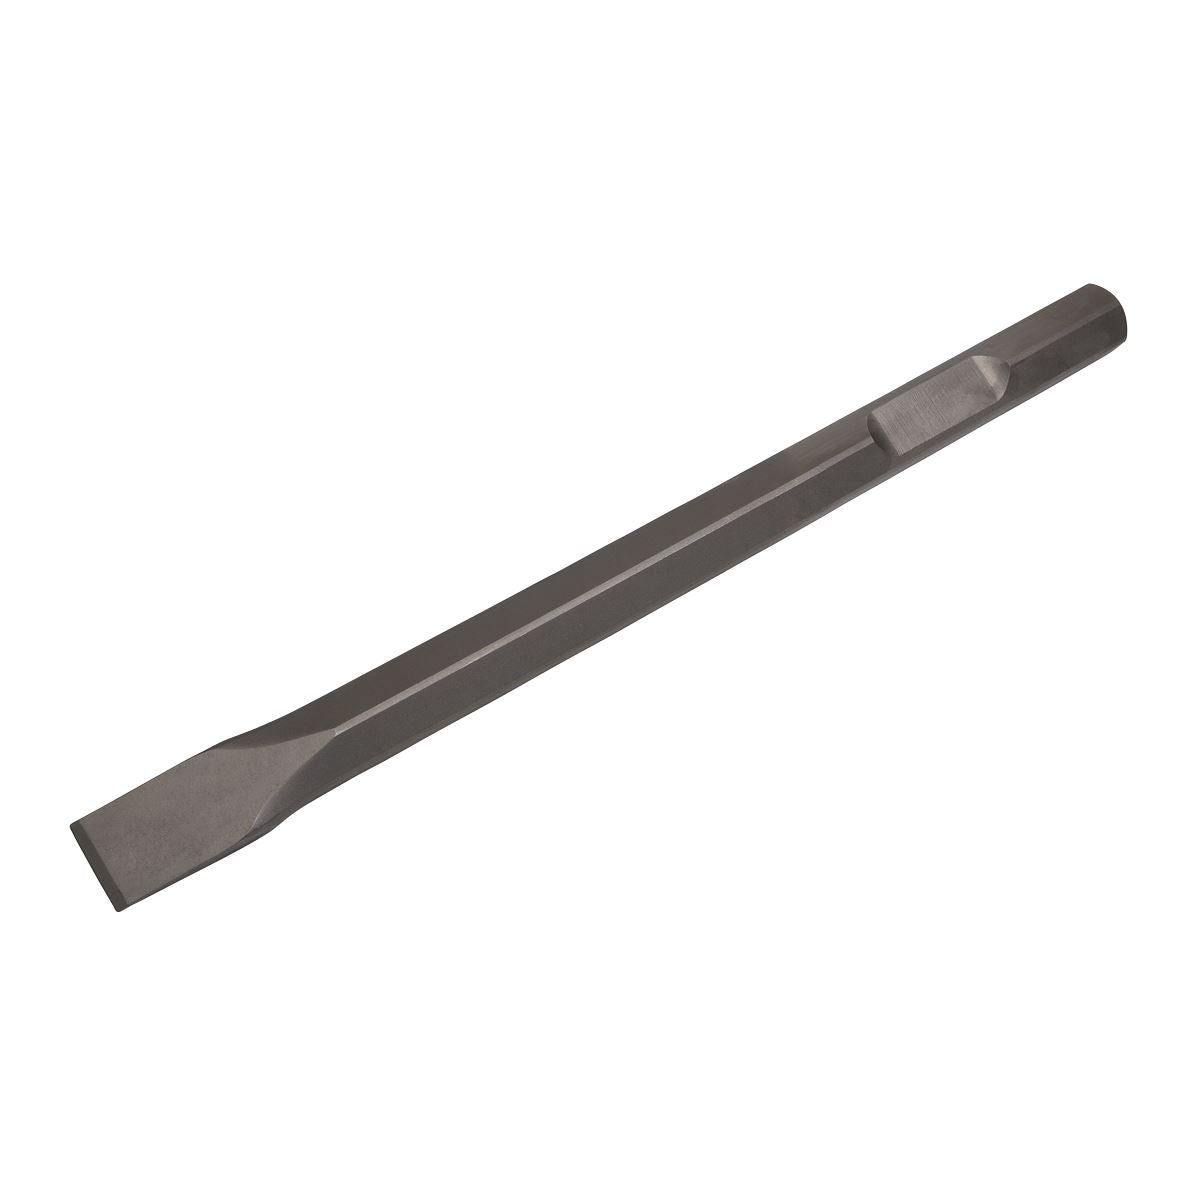 Worksafe by Sealey Chisel 30 x 450mm - Bosch 11304